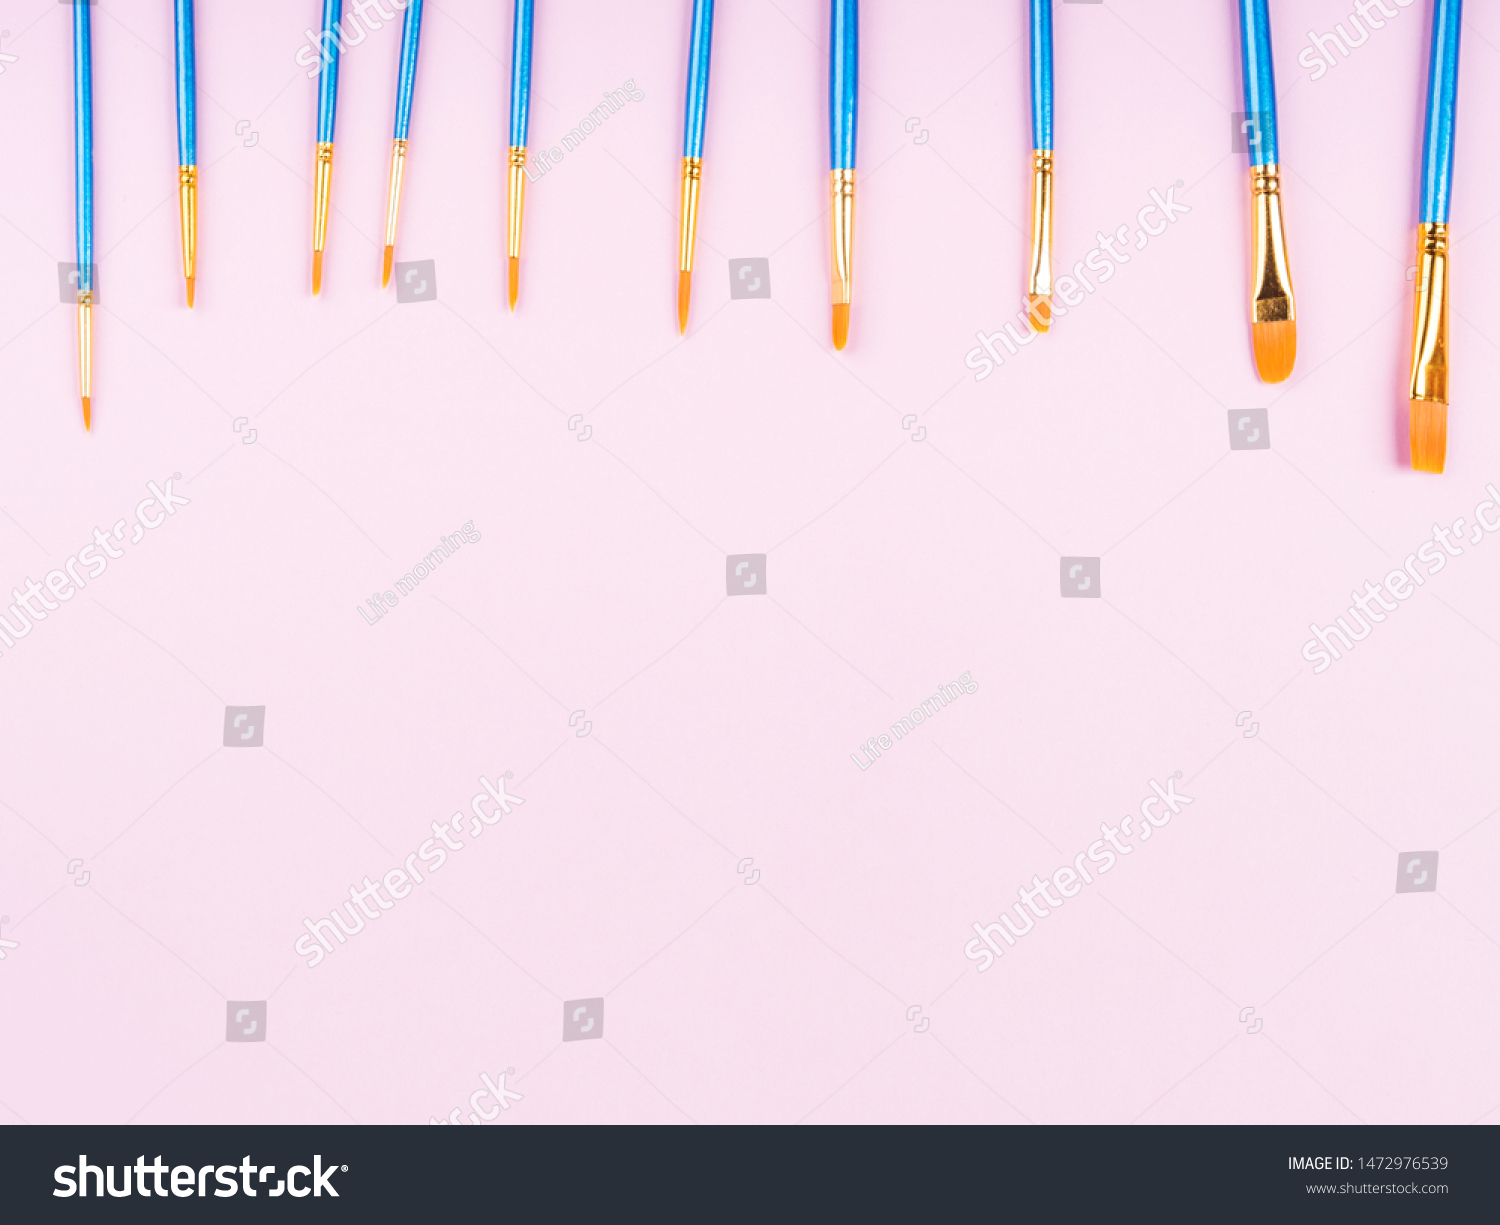 Blue paintbrushes on pink background. Art supply concept #1472976539